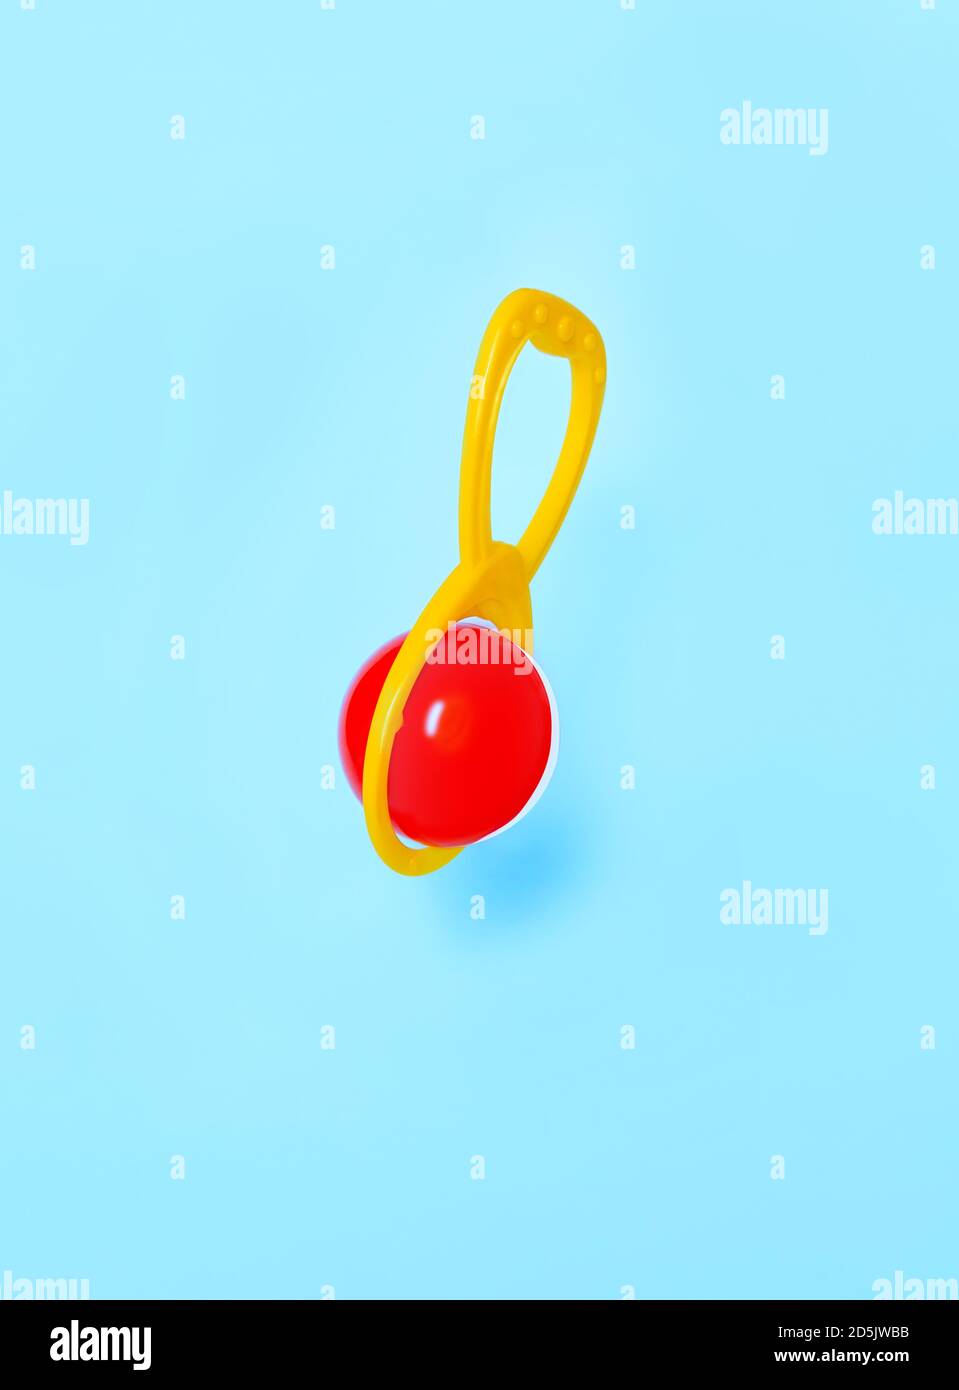 Funny card with one baby rattle hanging on blue background. First sound toy for infat baby. Close-up of red and yellow rattle. Levitation effect. Stock Photo